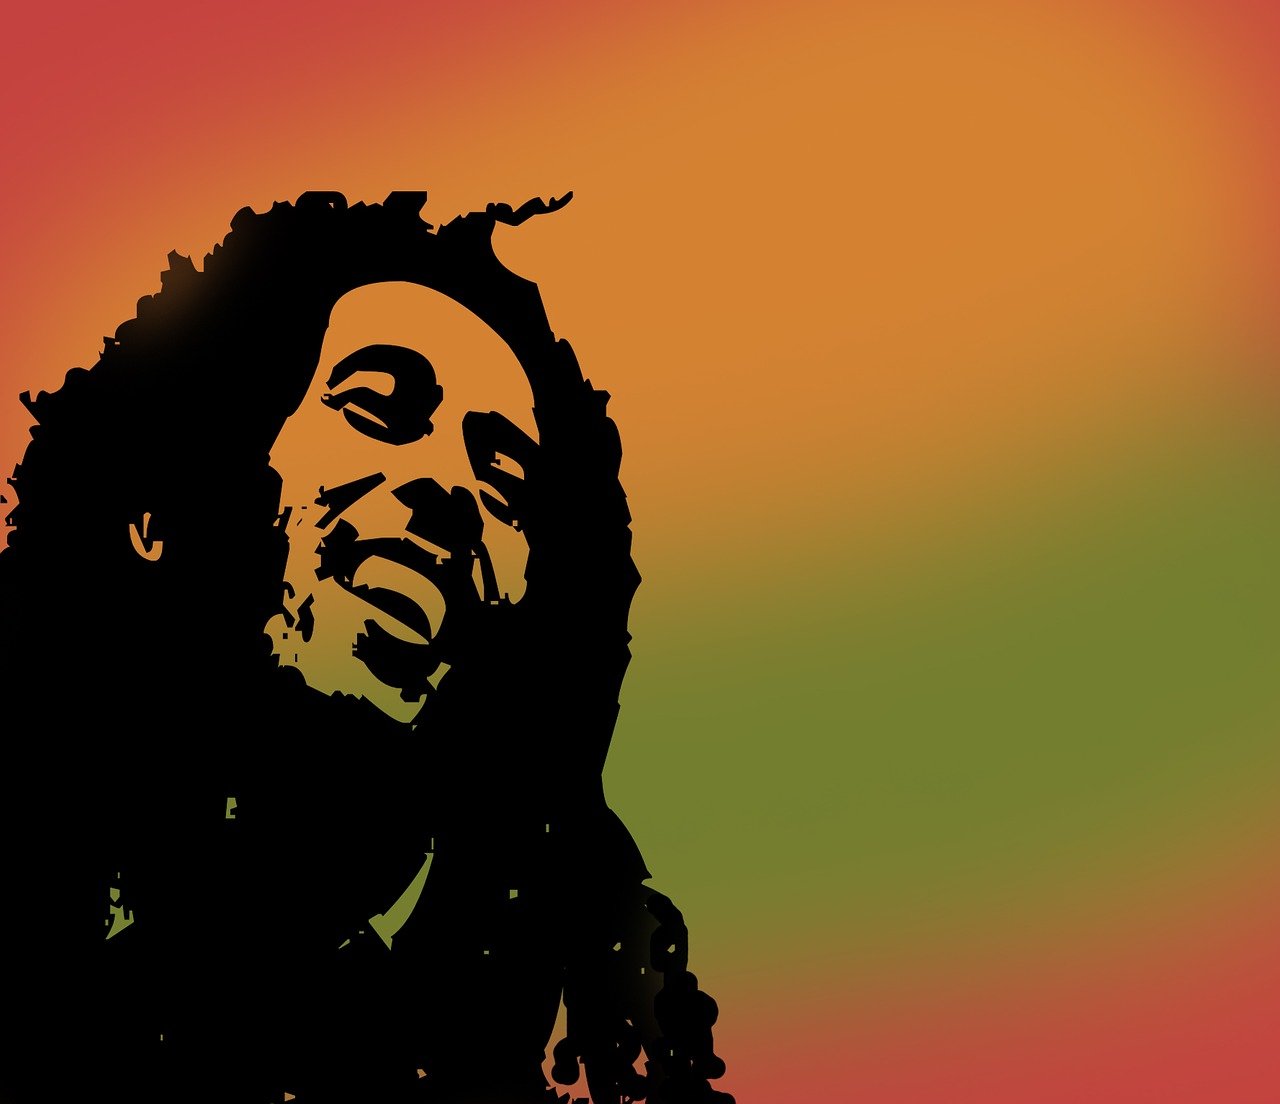 Bob Marley, Pop Culture, Image Rights, and Contested Legacy